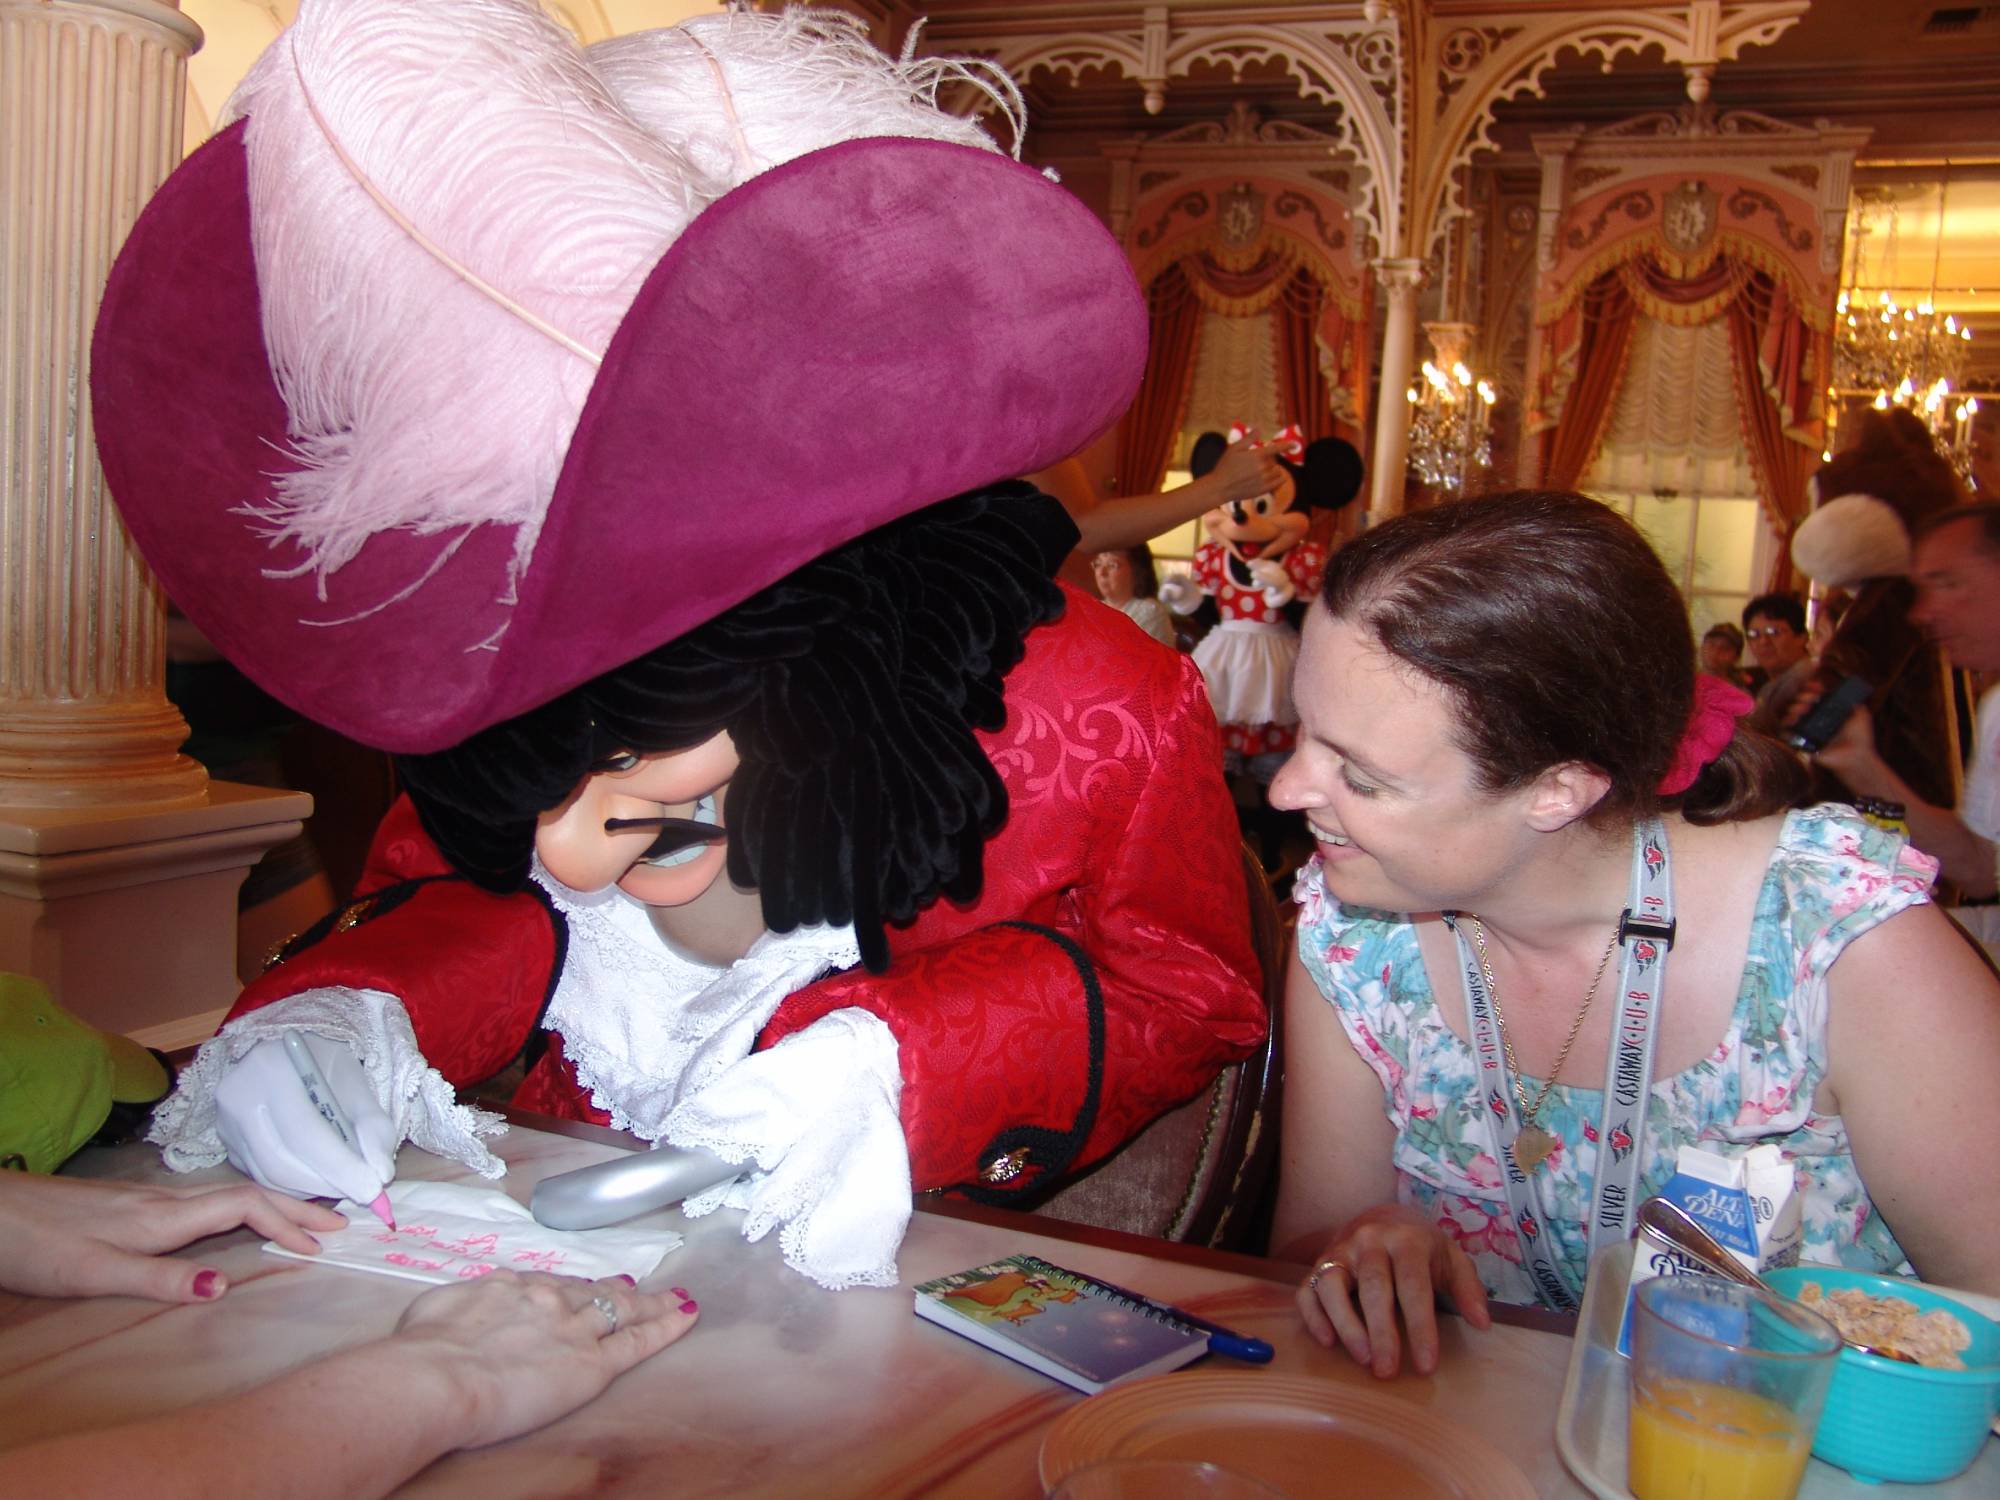 Start your day with a character meal at Disneyland |PassPorter.com